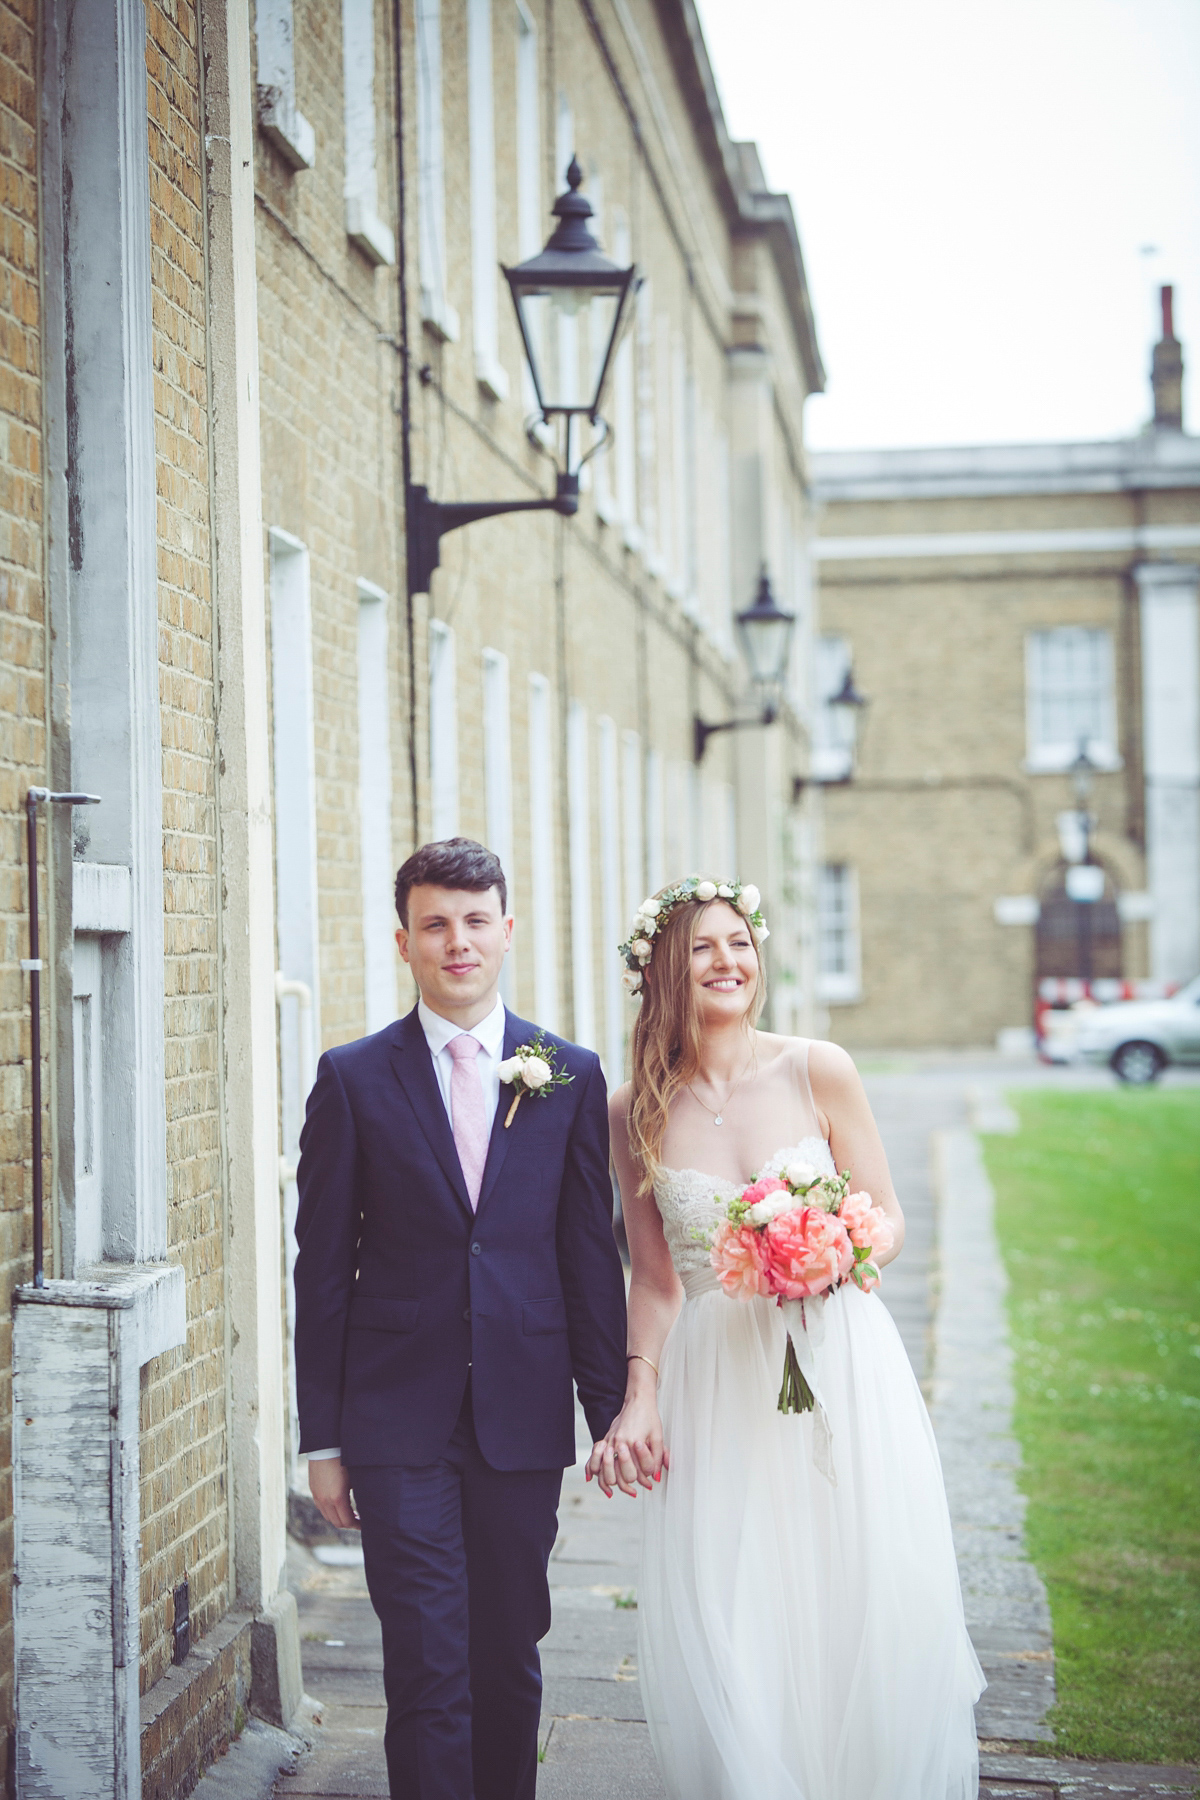 Holly wore a Grace Loves Lace gown for her modern wedding planned in just 2 weeks. The venue was The Asylum chapel in London. Photography by My Beautiful Bride.